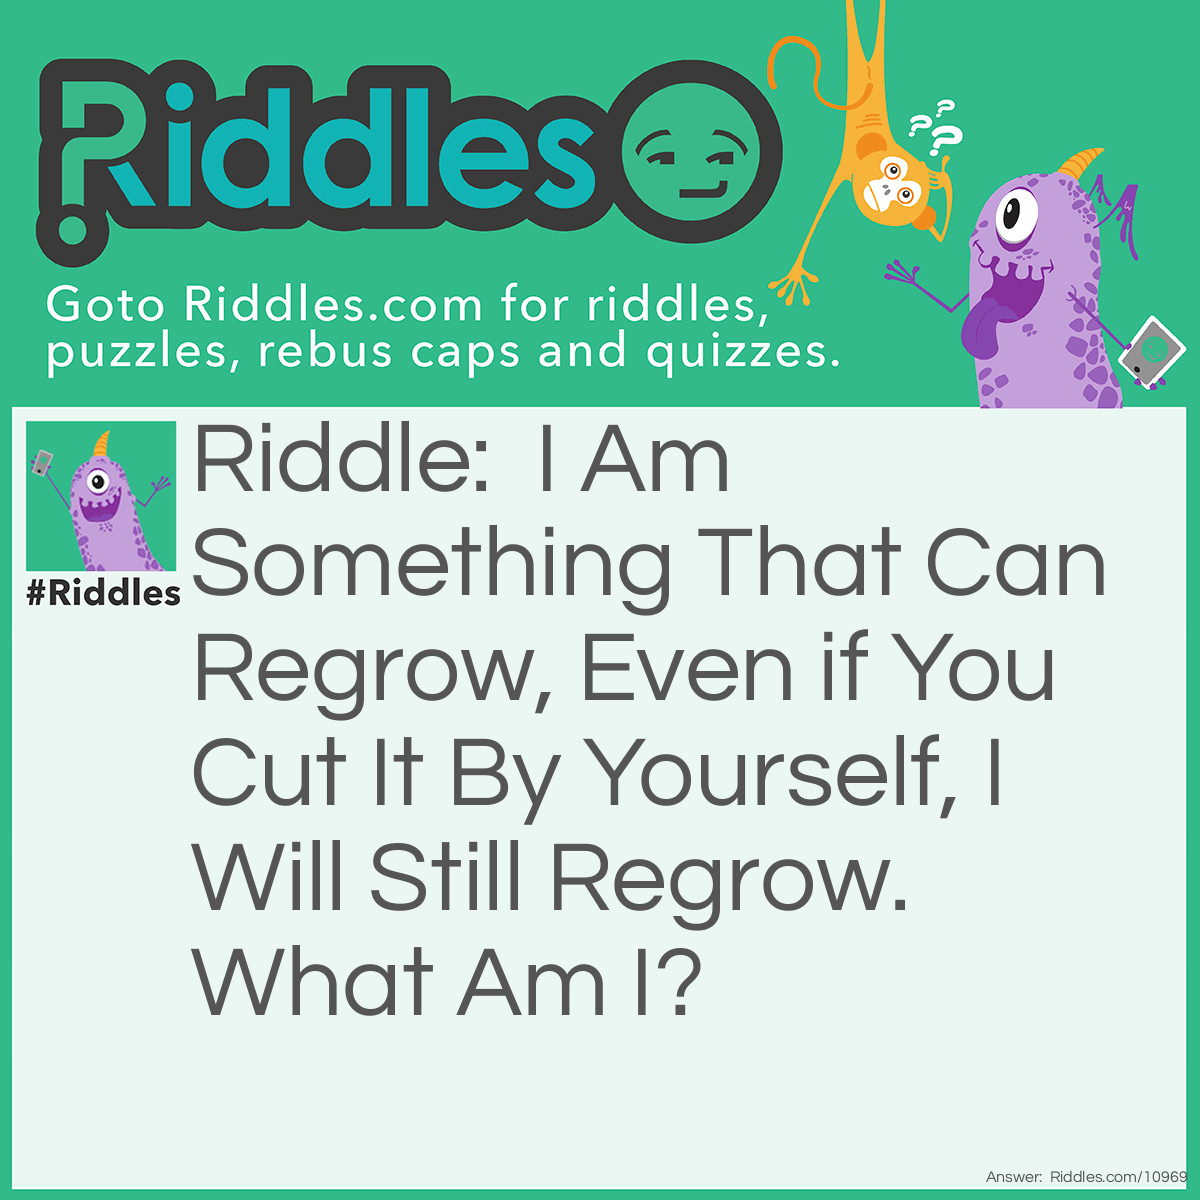 Riddle: I Am Something That Can Regrow, Even if You Cut It By Yourself, I Will Still Regrow. What Am I? Answer: Liver.